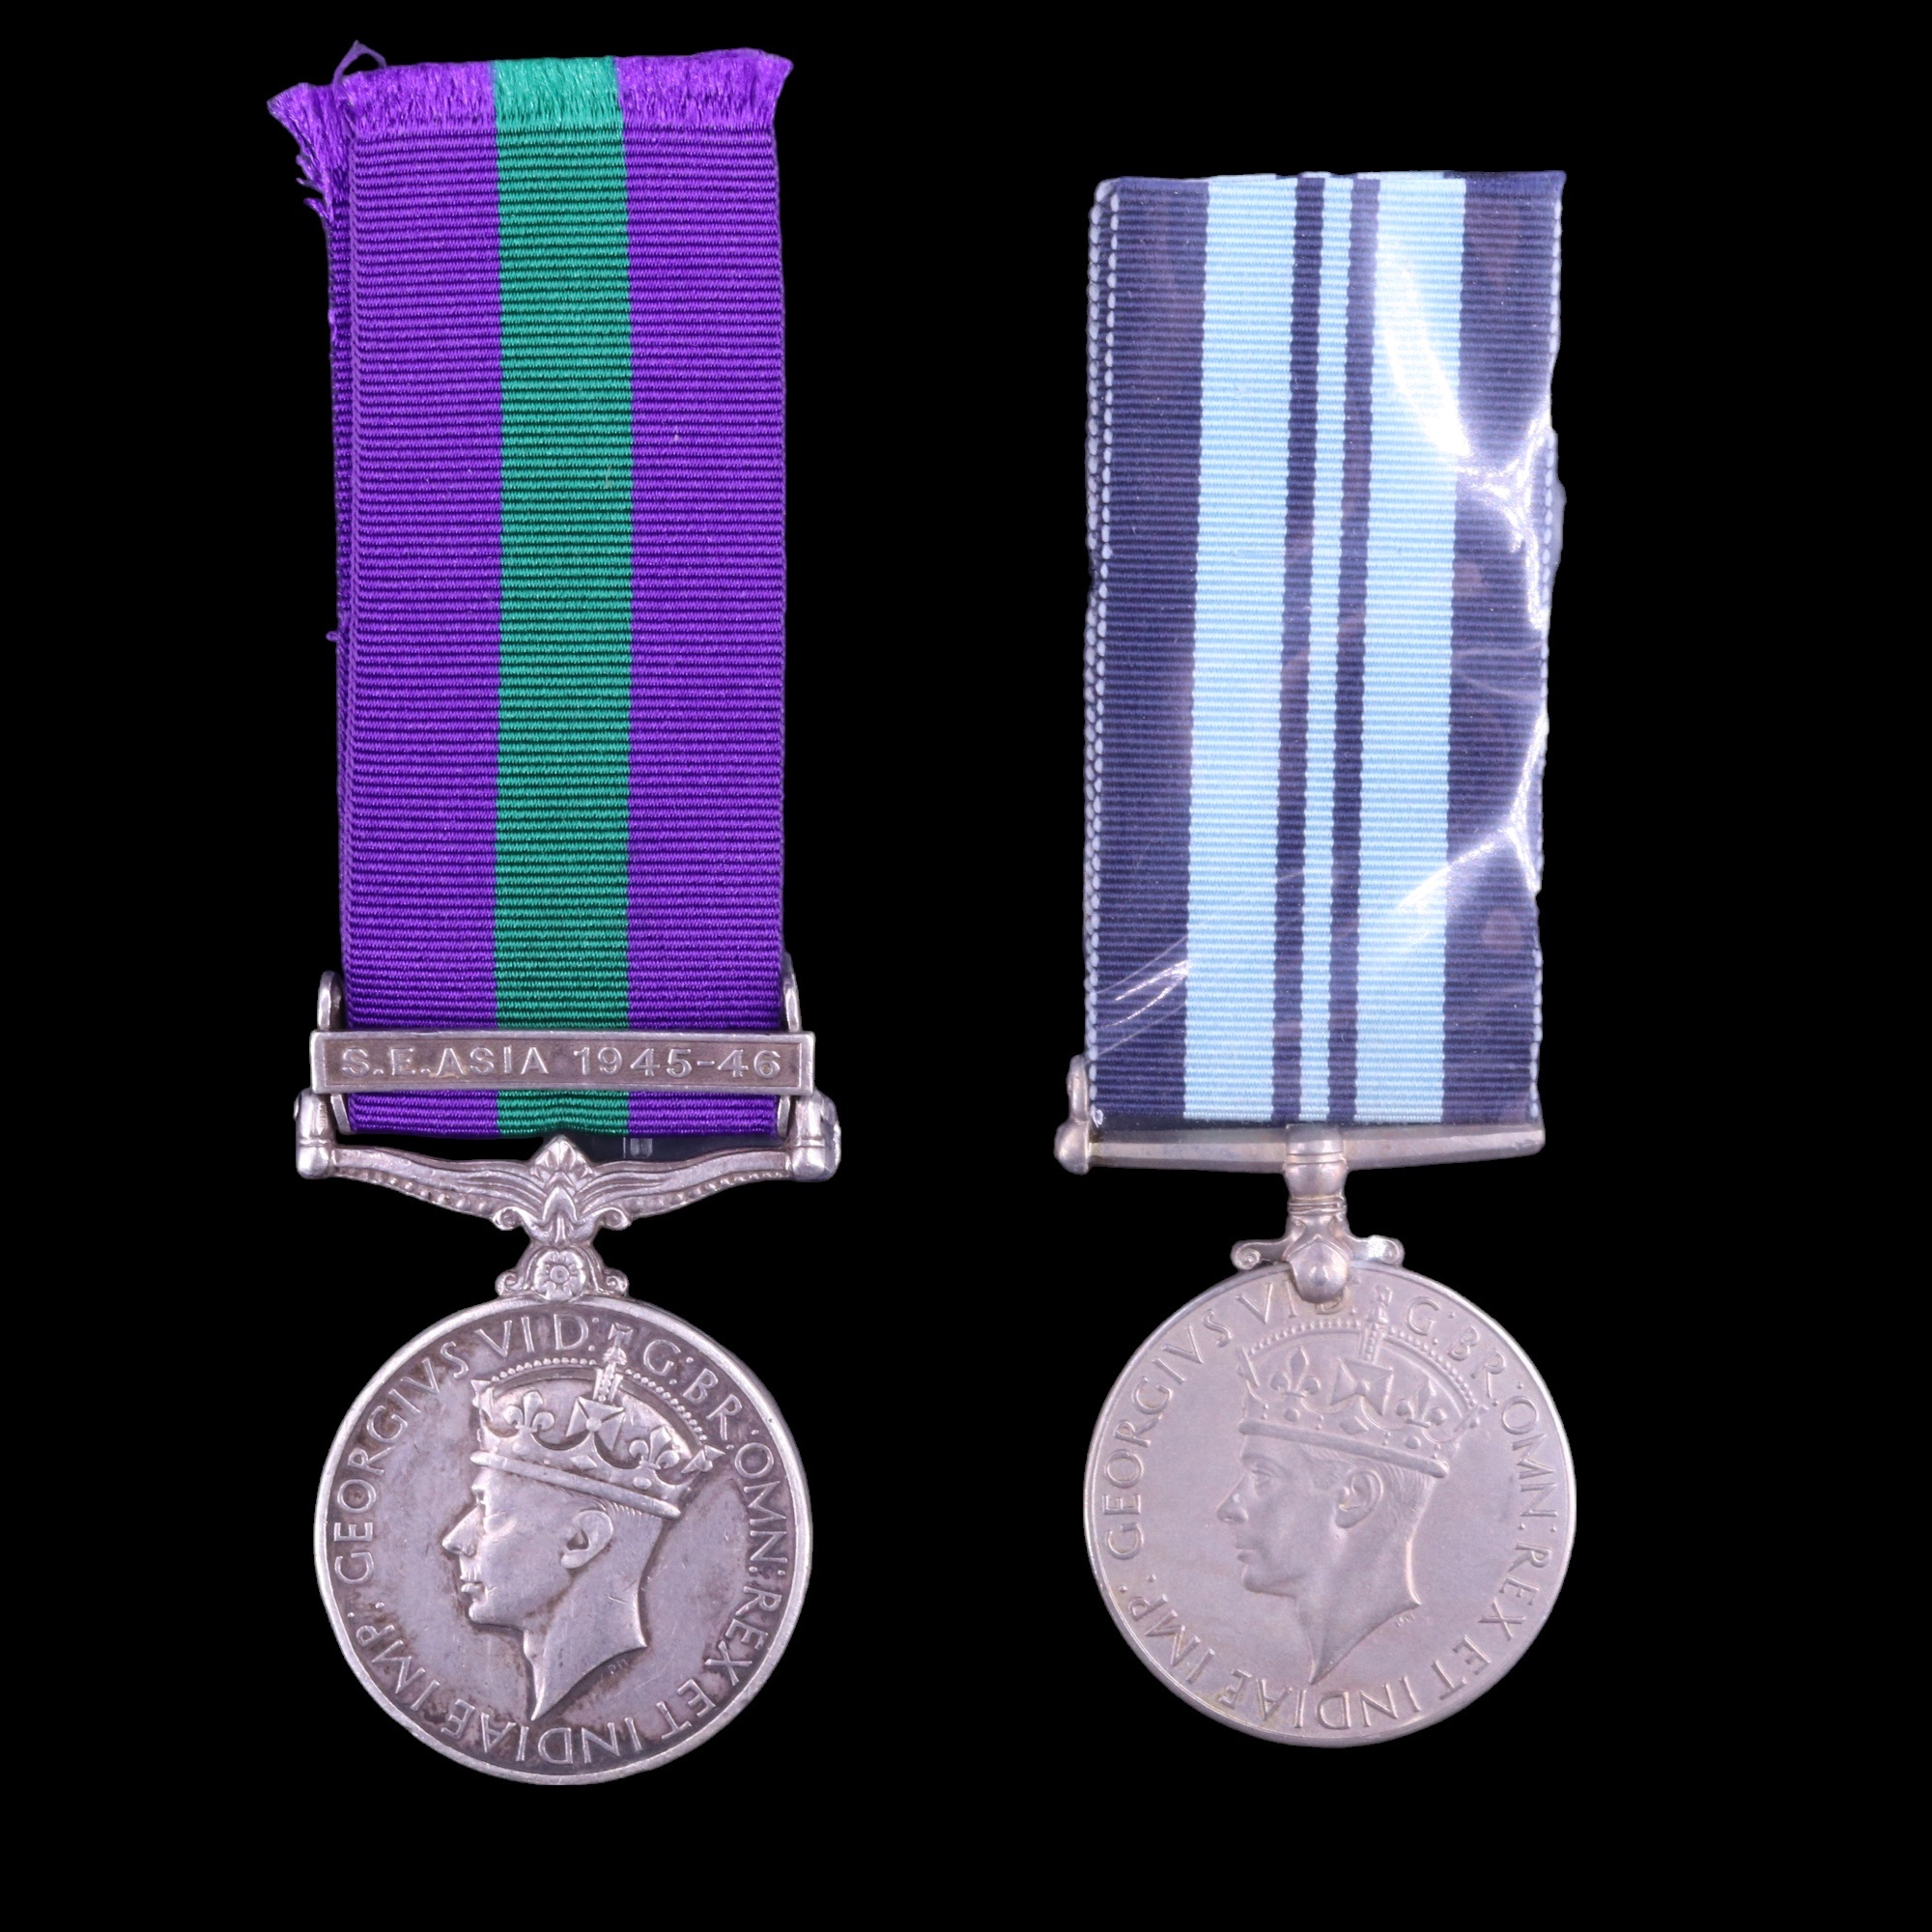 A General Service Medal with S.E. Asia 1945-46 clasp together with an India Service Medal 1939-45 (